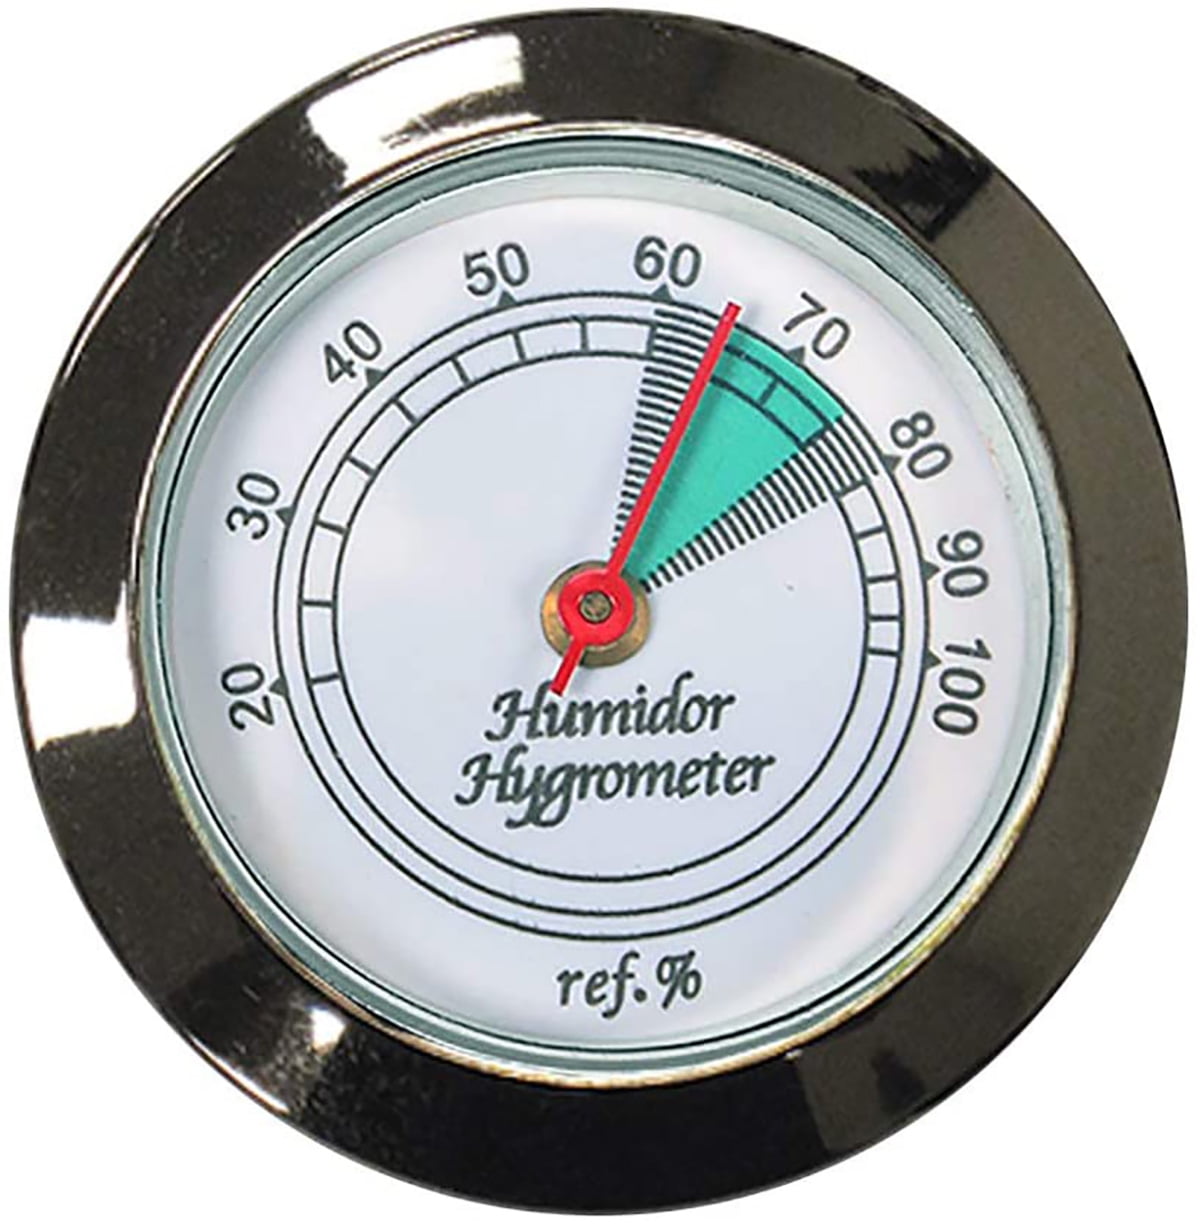 Free Ship New Analog Hygrometer by Western Humidor Free Shipping 